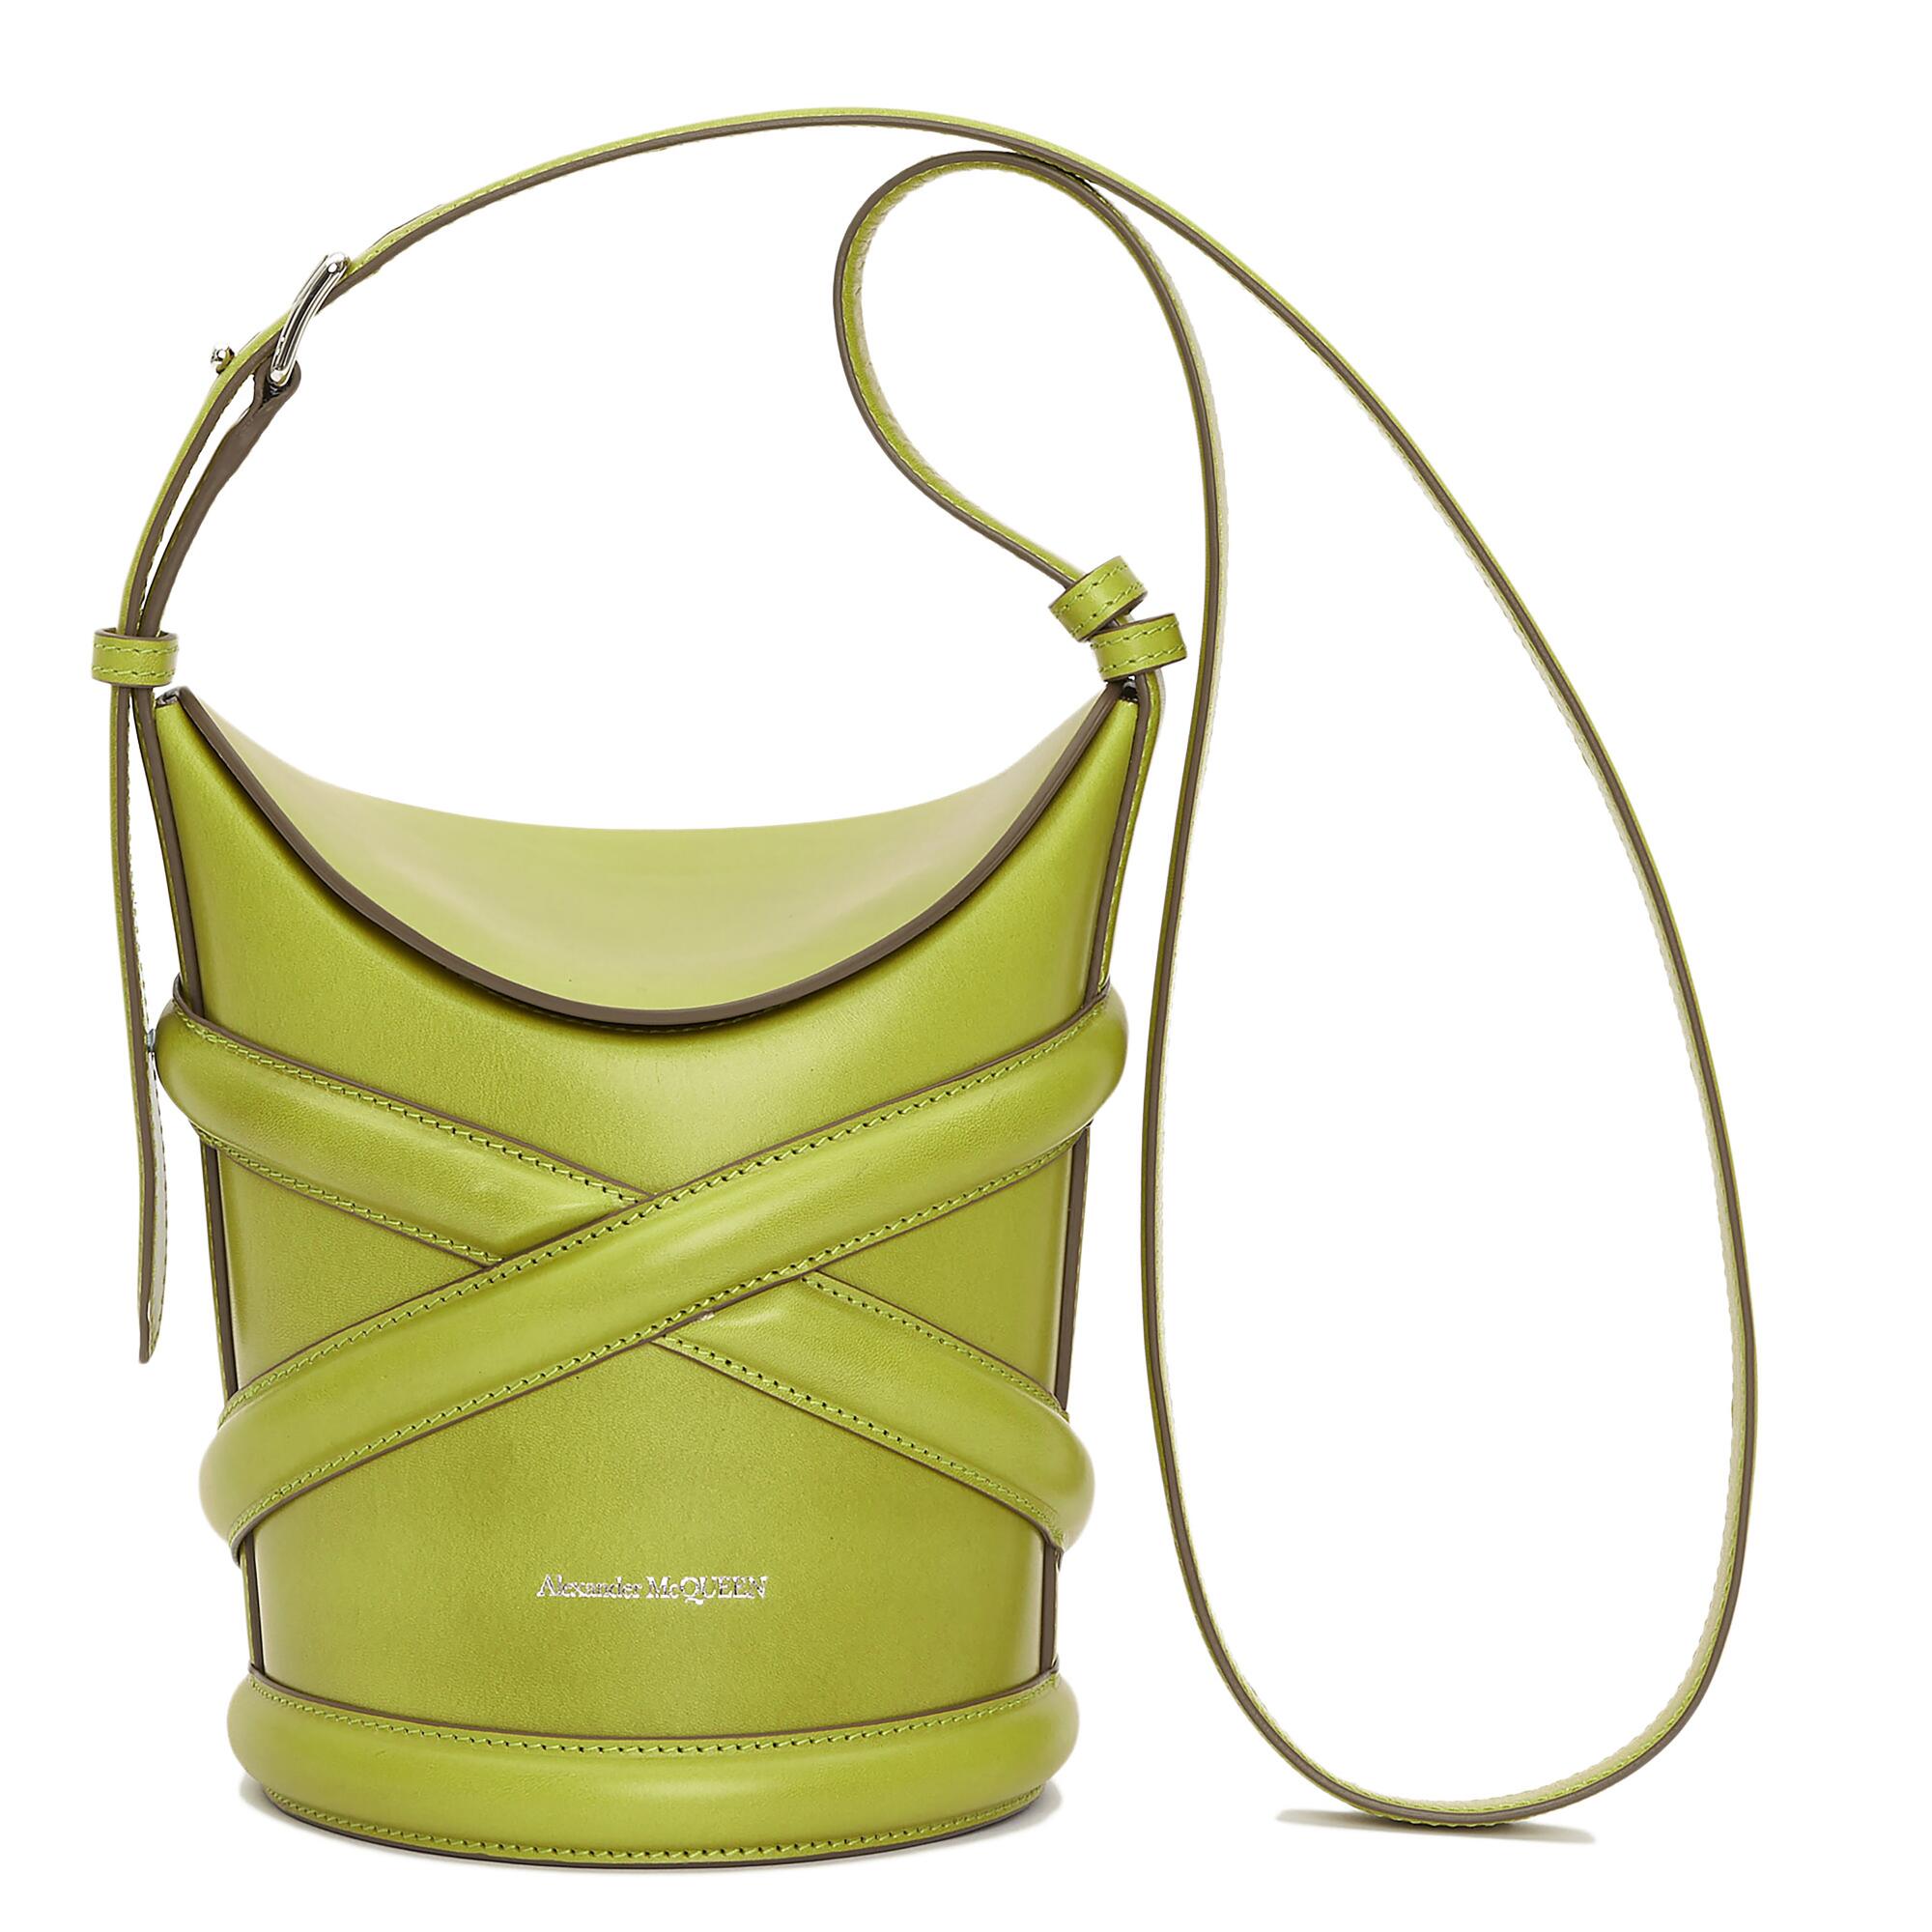 The Curve calf leather bag from Alexander McQueen in lime green